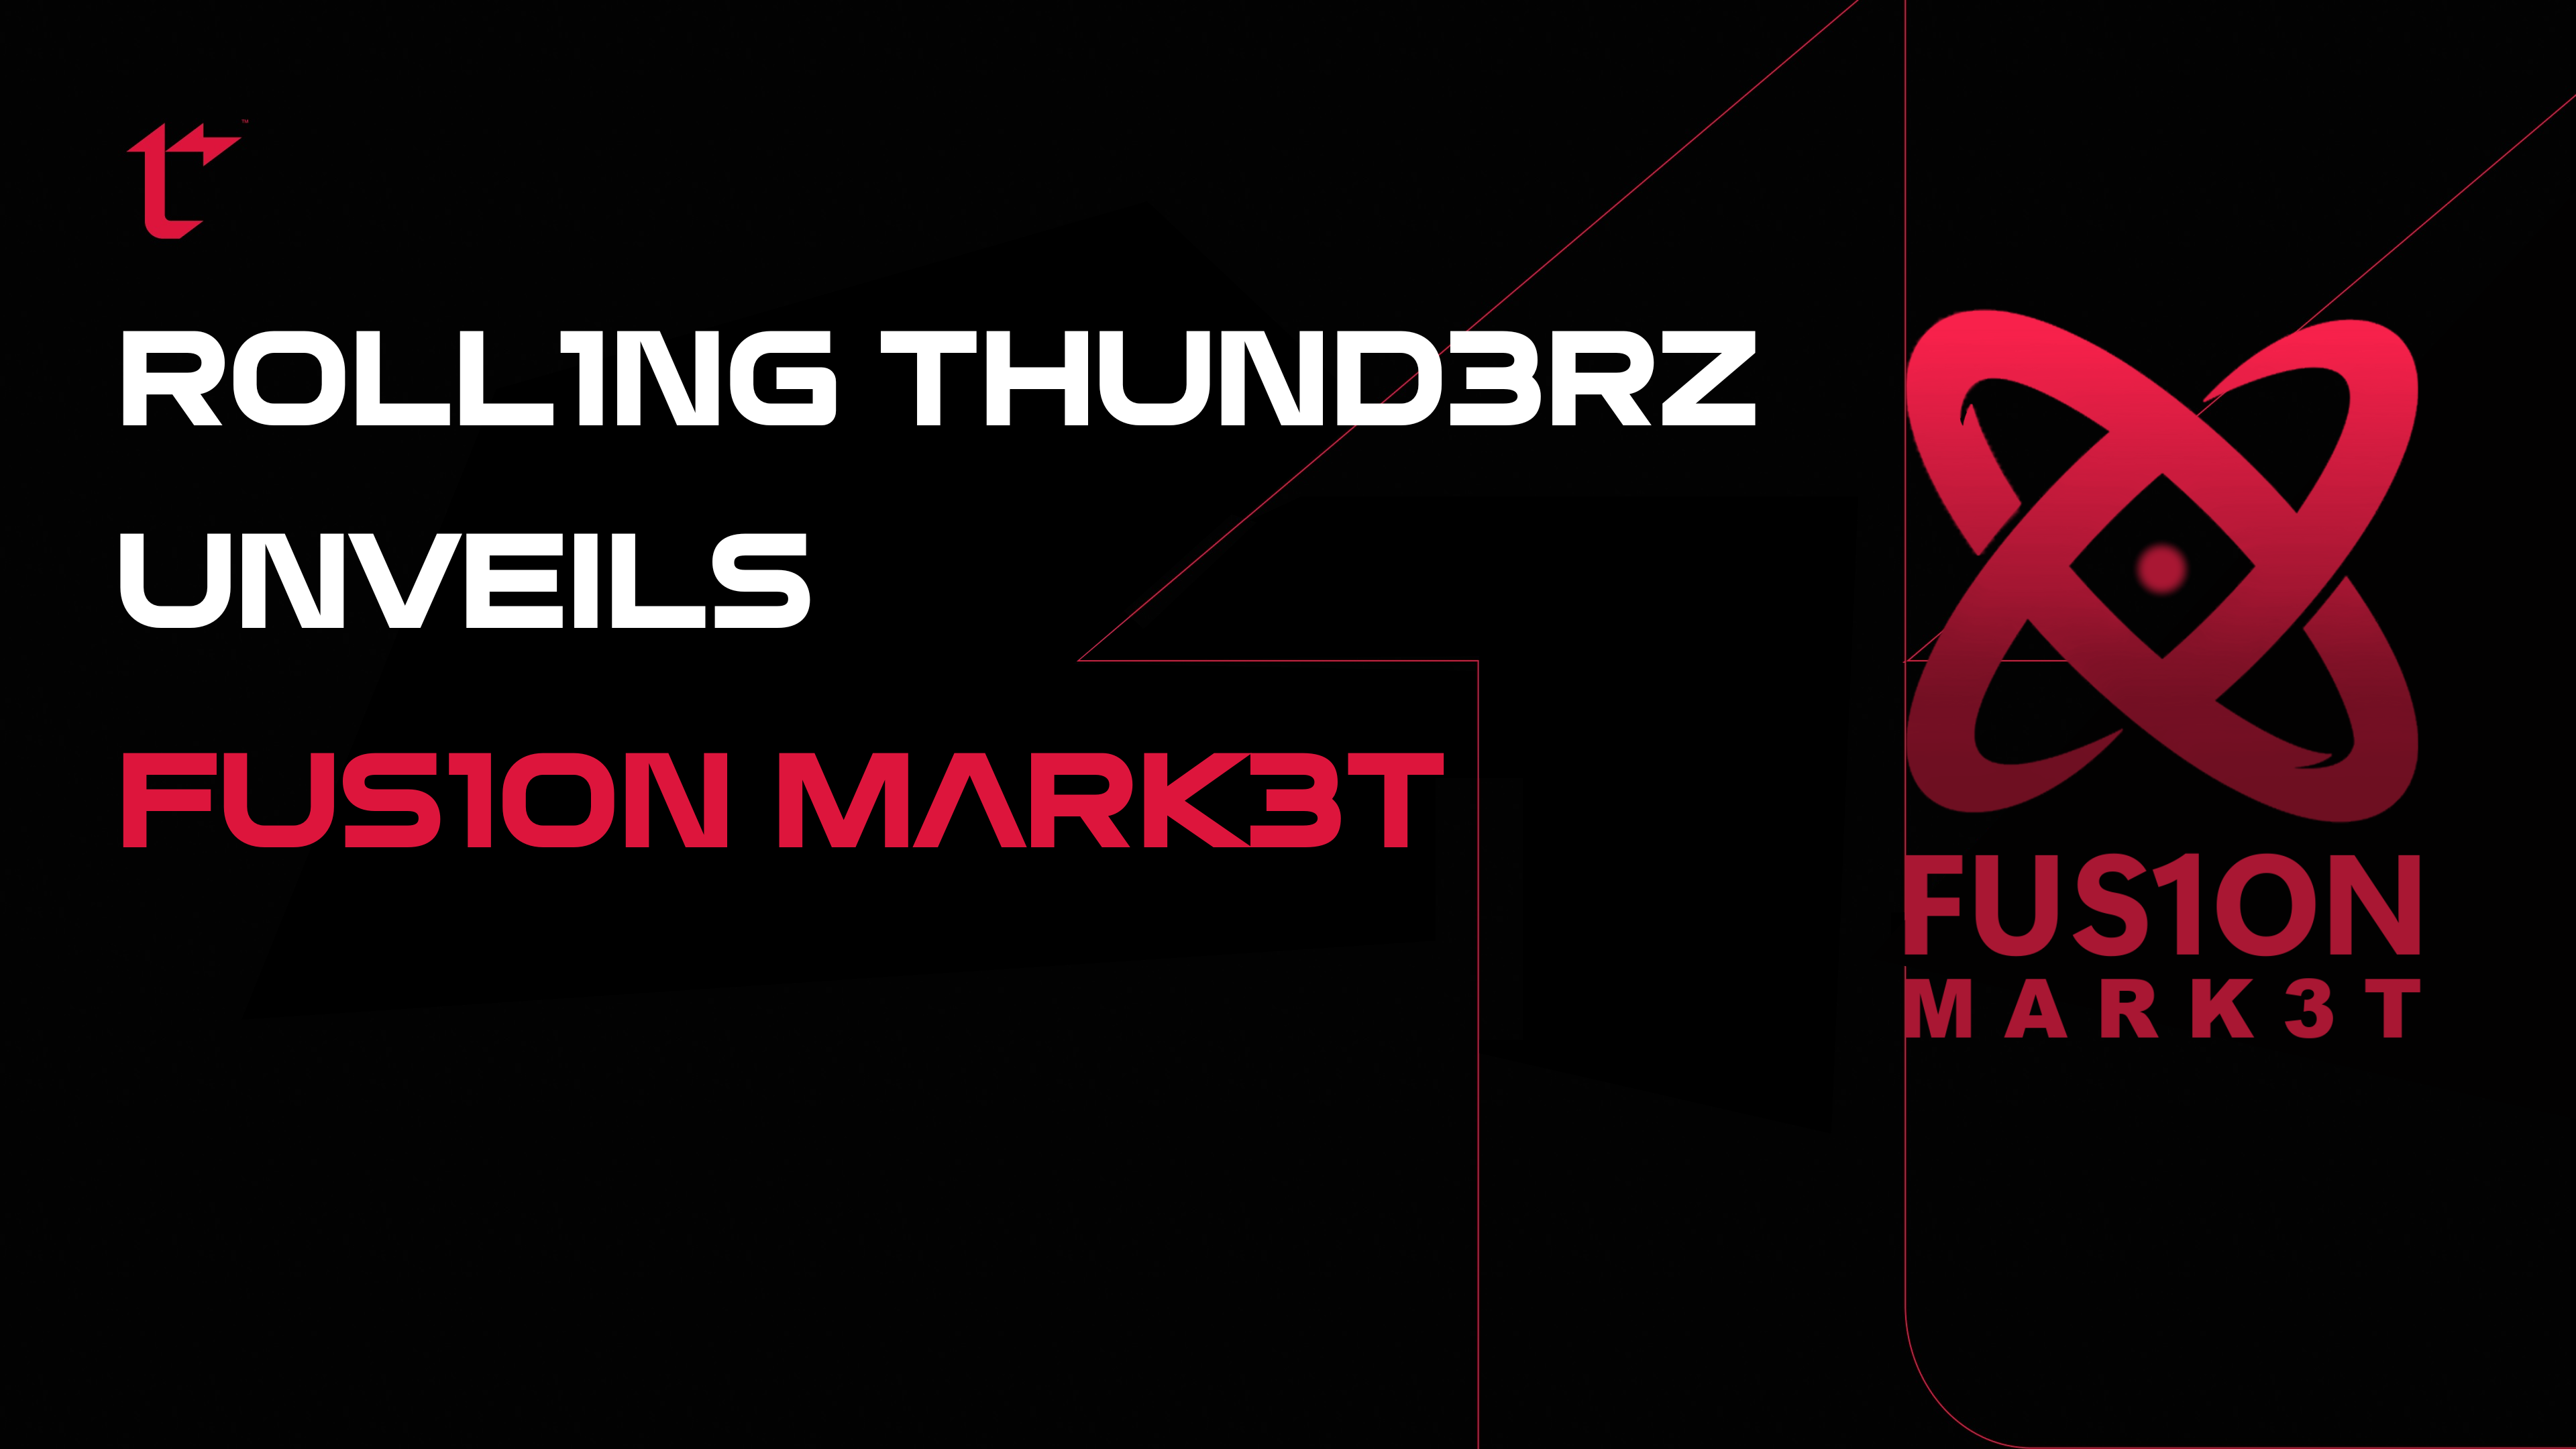 Roll1ng Thund3rz unveils online access to FUS1ON MARK3T